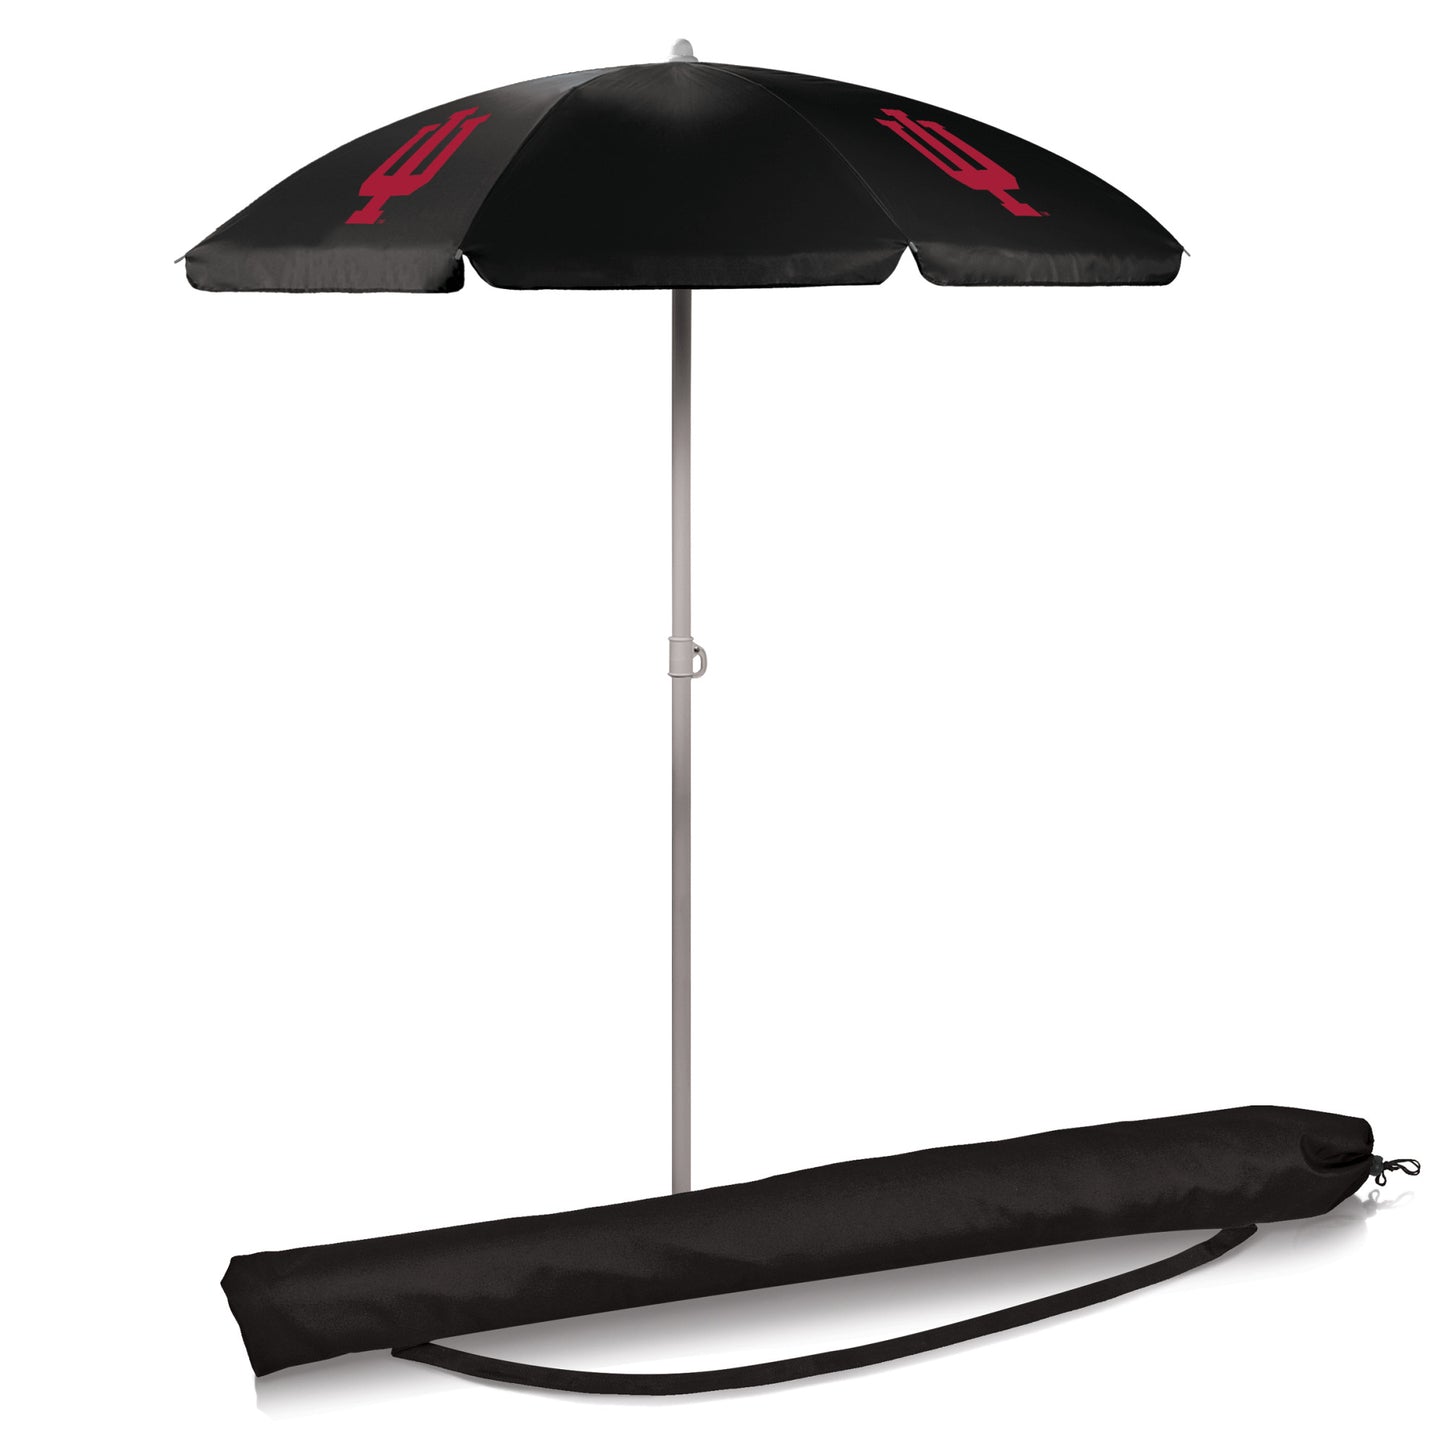 Indiana Hoosiers 5.5' Portable Beach Umbrella by Picnic Time